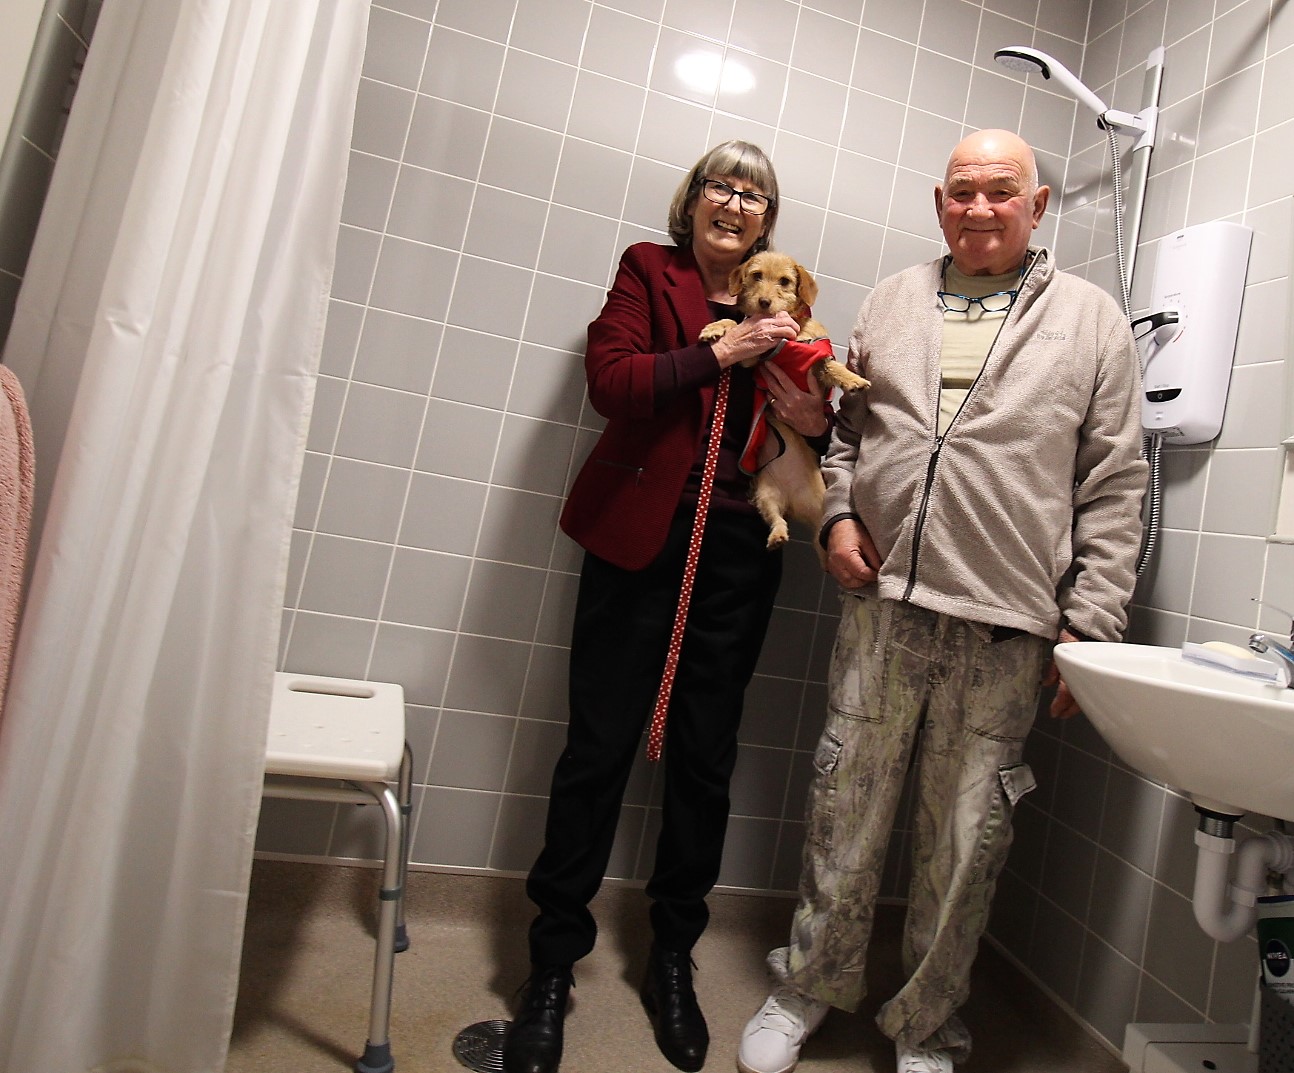 man, woman and a dog in bathroom